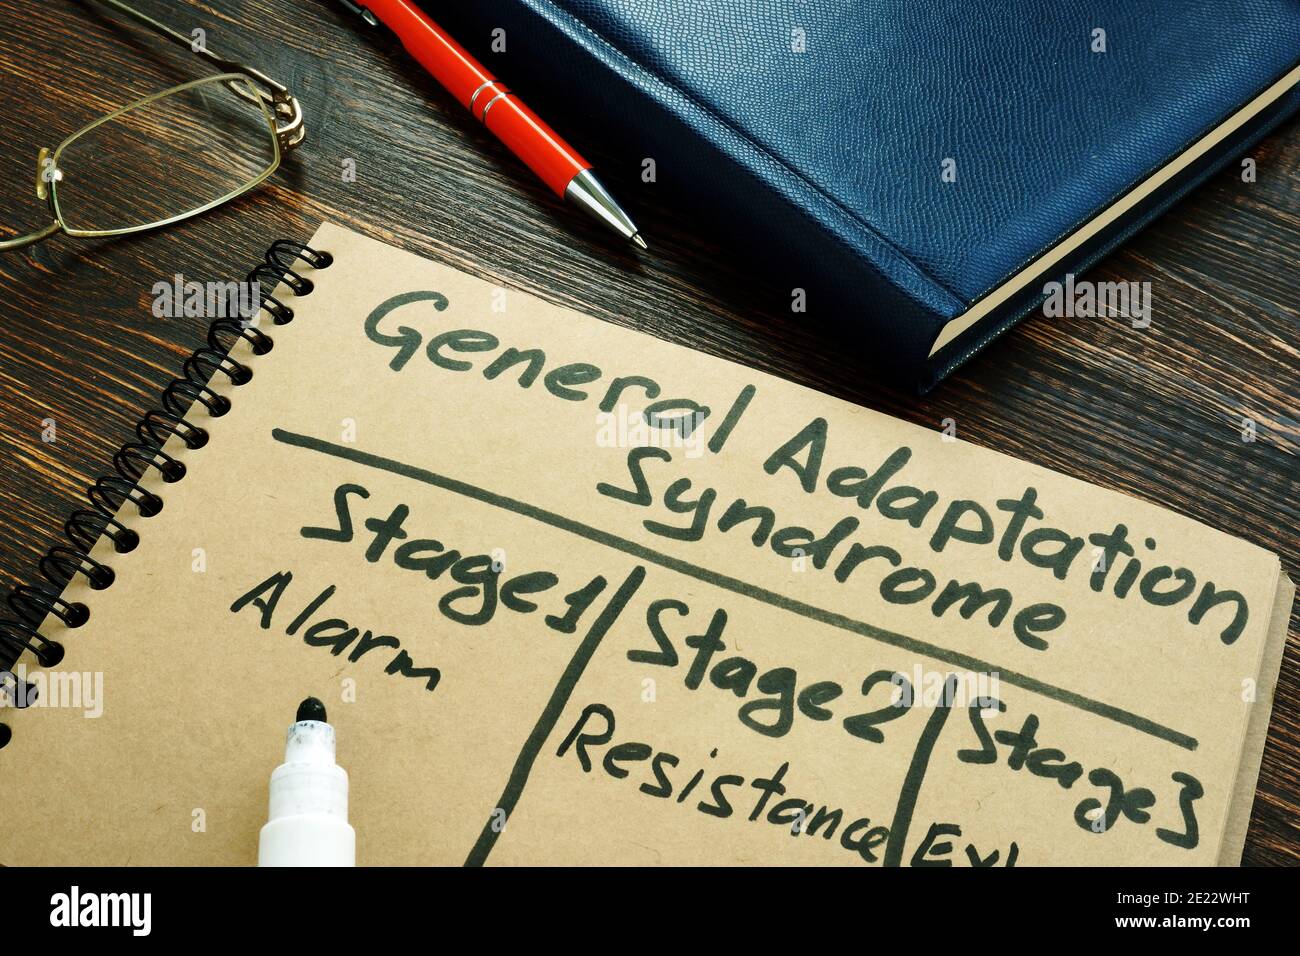 General adaptation syndrome with stages written on the page. Stock Photo